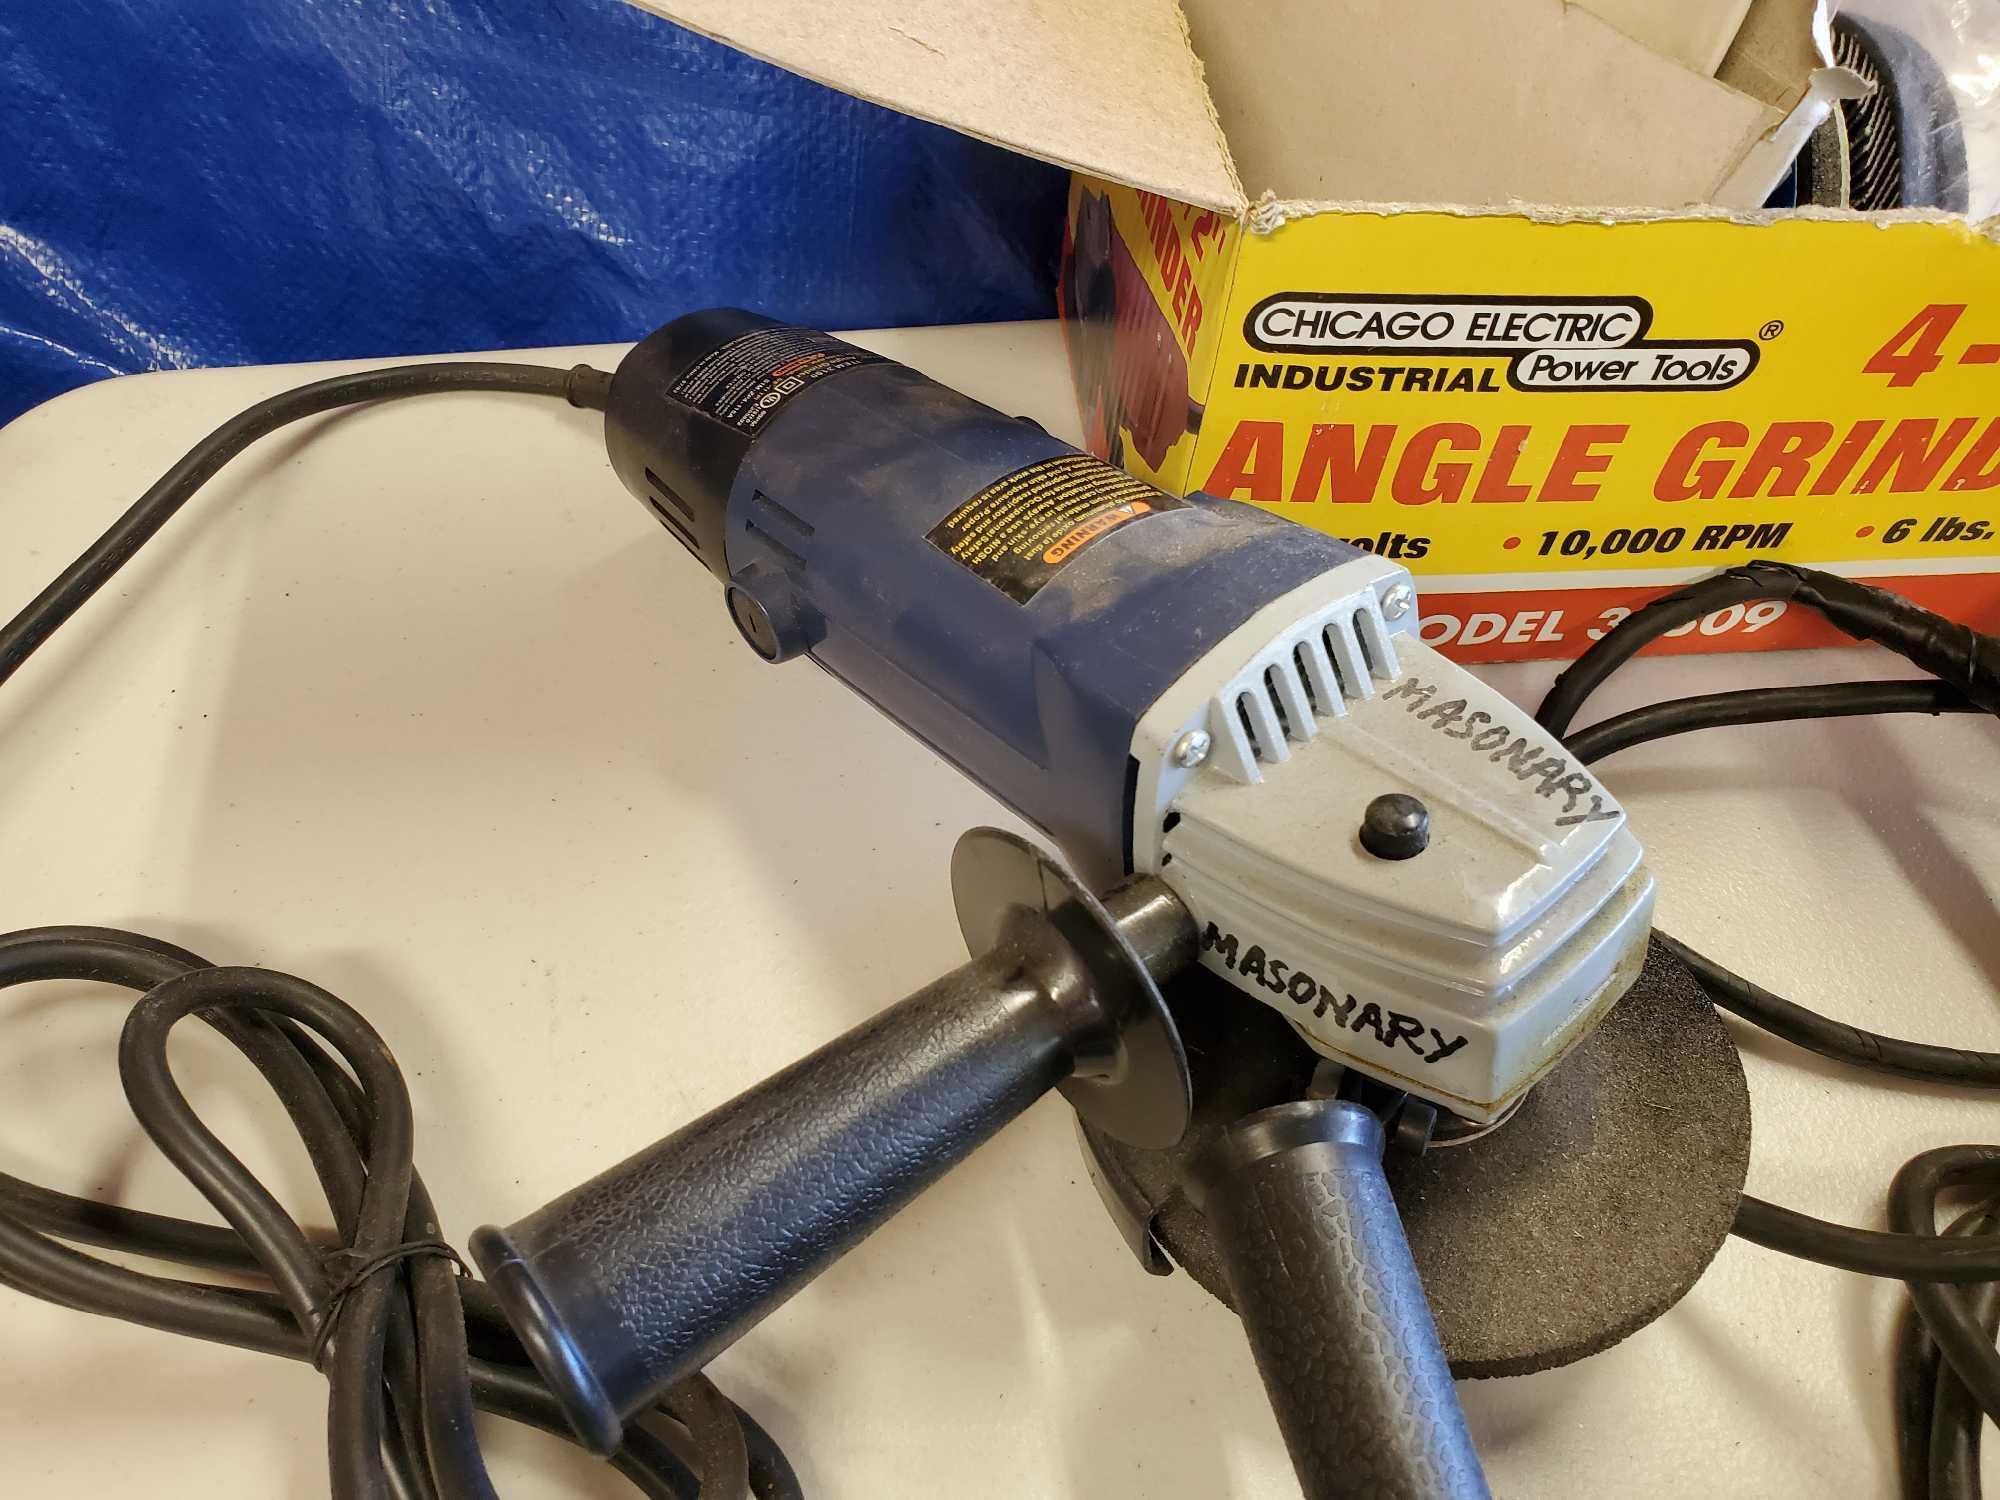 8 CORDED POWER TOOLS AND GRINDING WHEELS